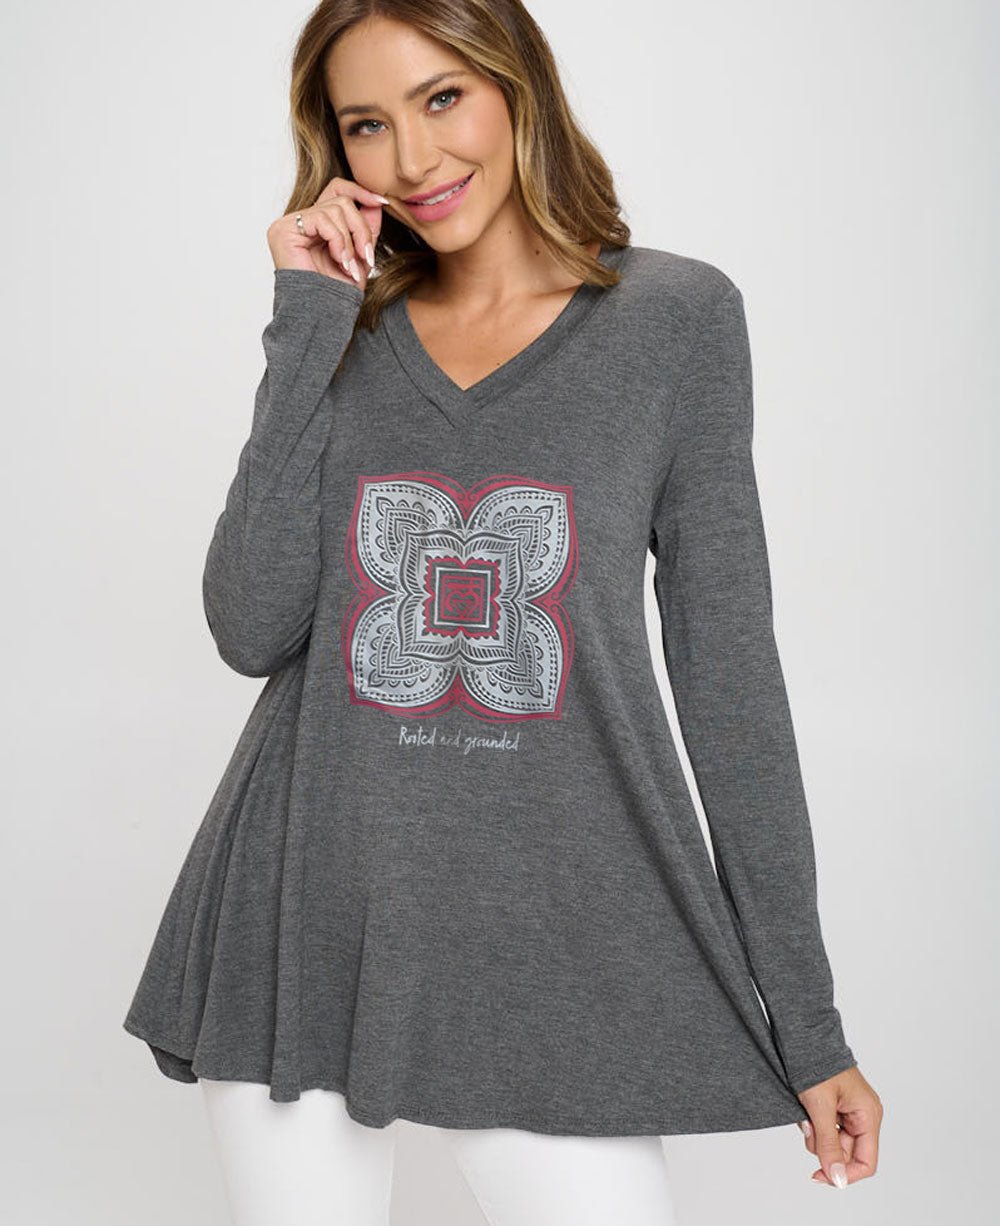 Grounded And Rooted Grey Tunic Top With Root Chakra Design - Shirts & Tops S